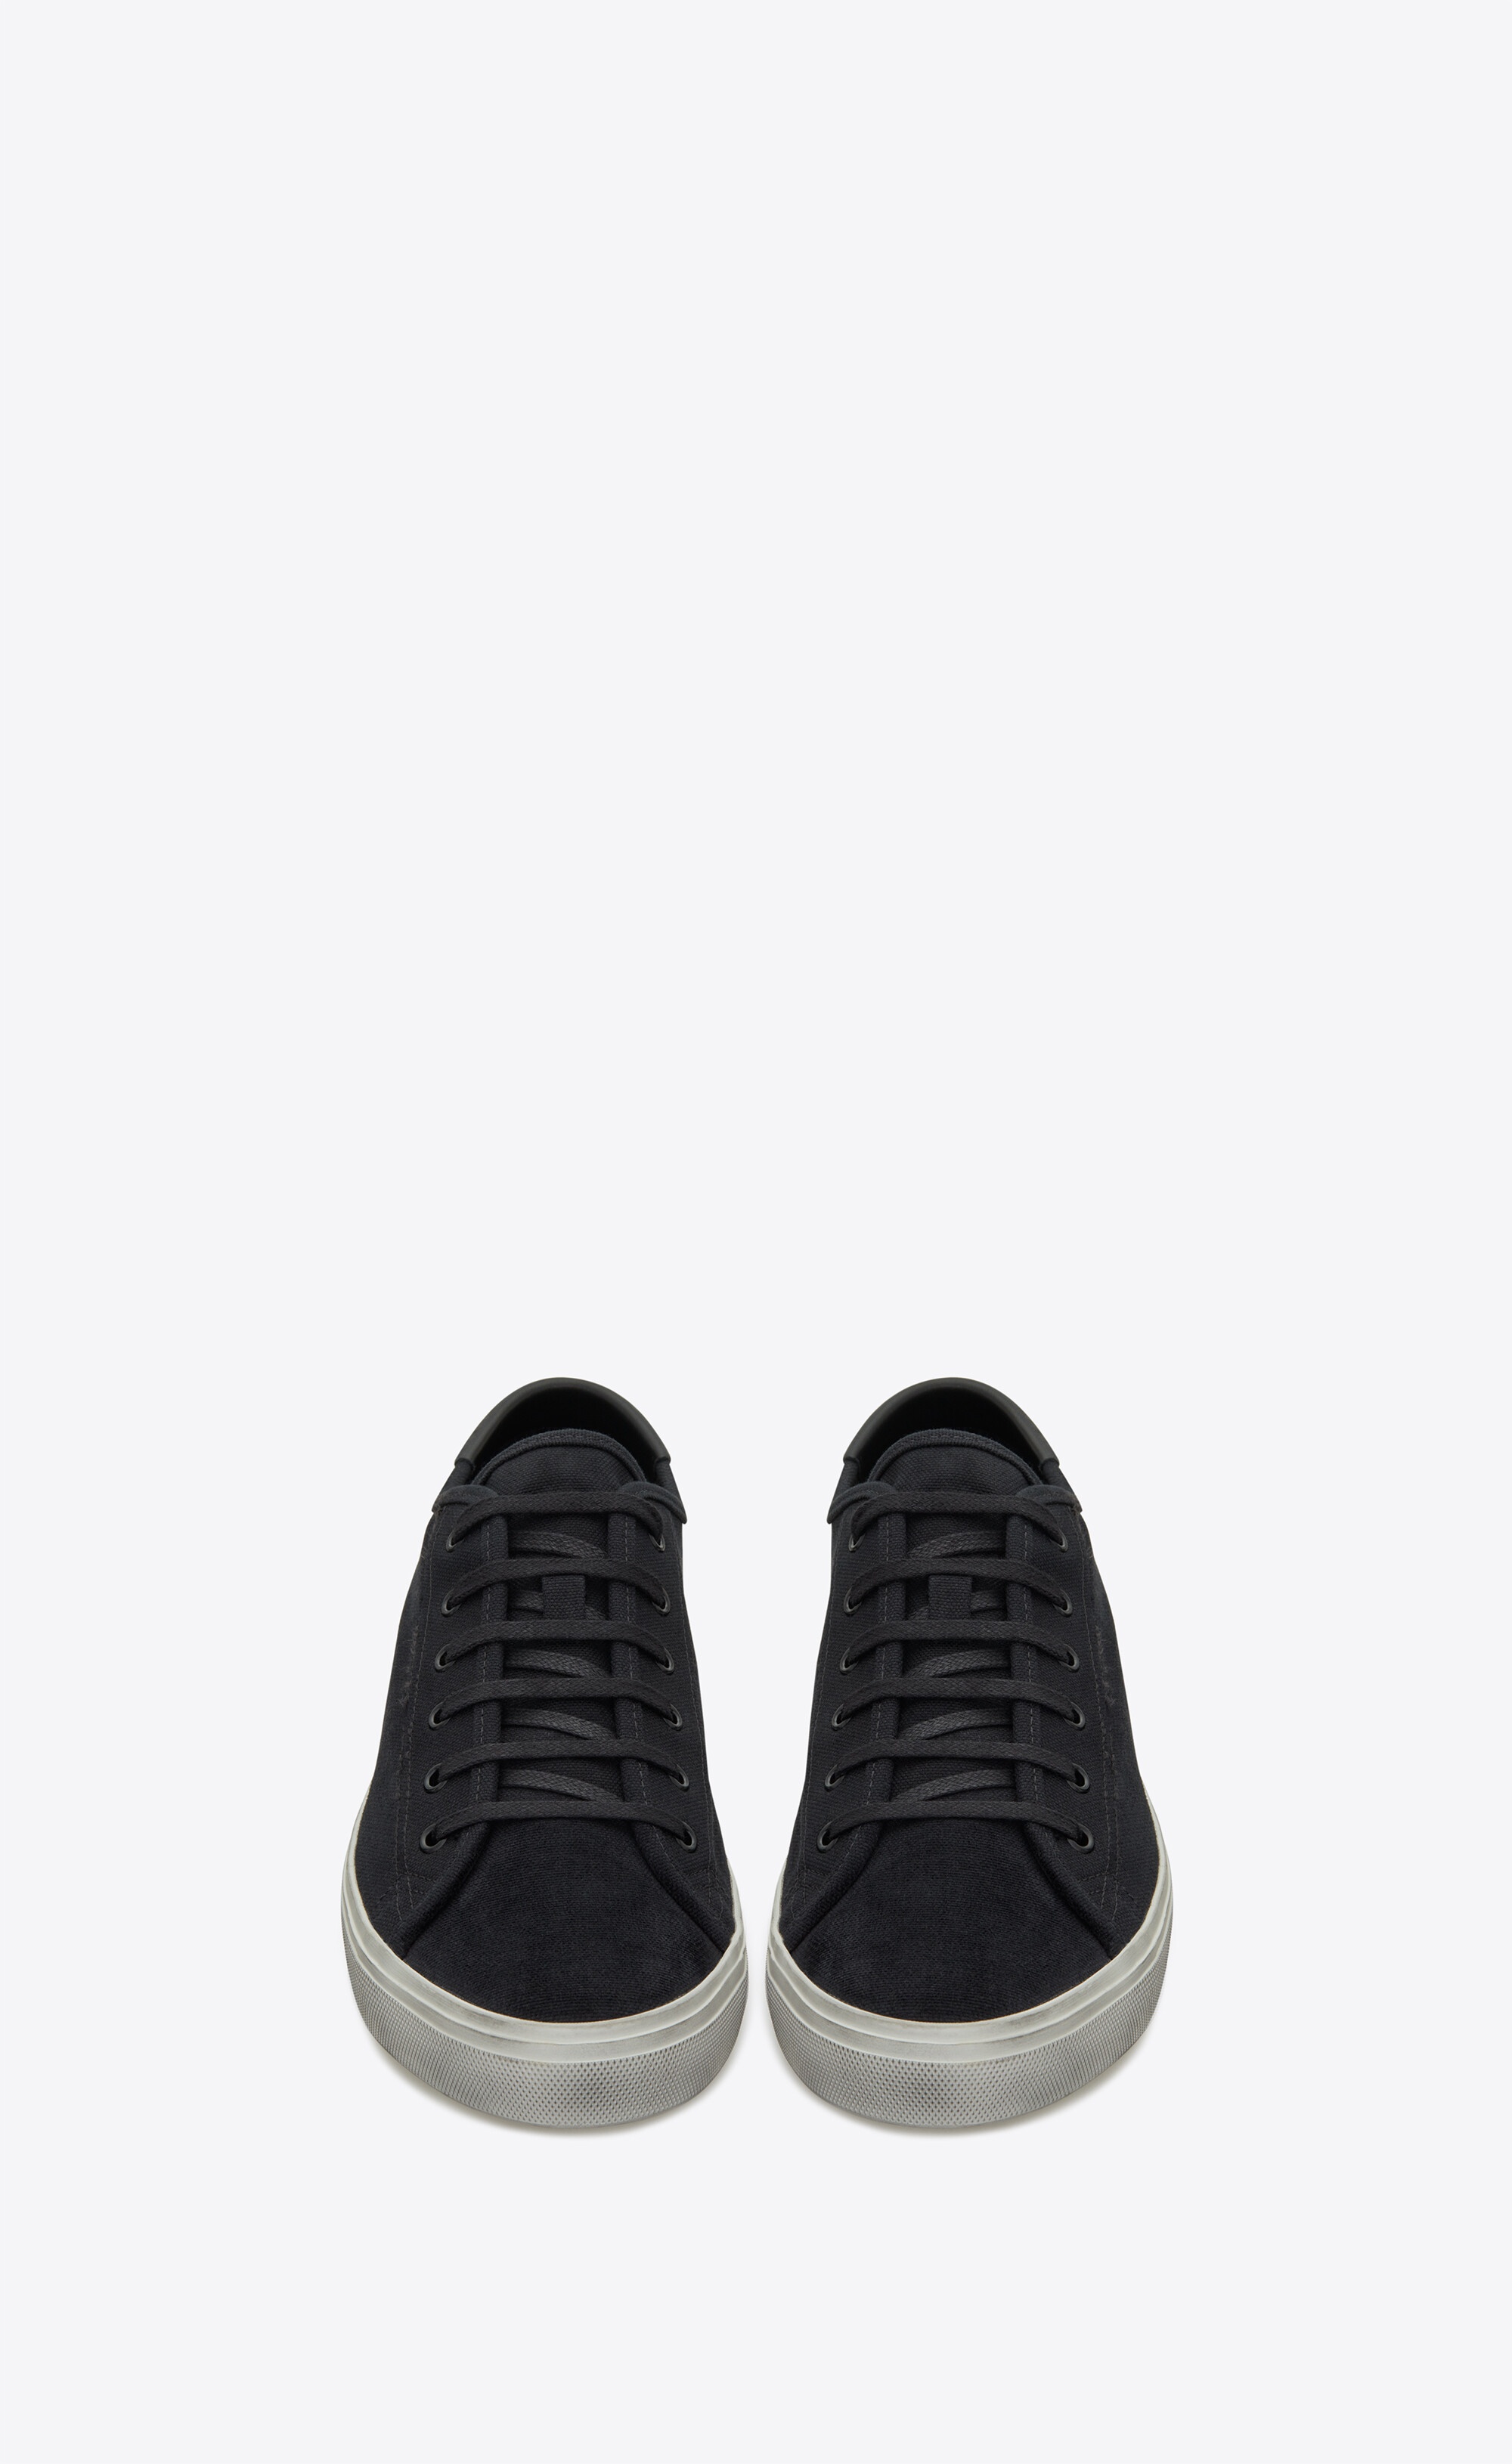 malibu sneakers in canvas and leather - 2